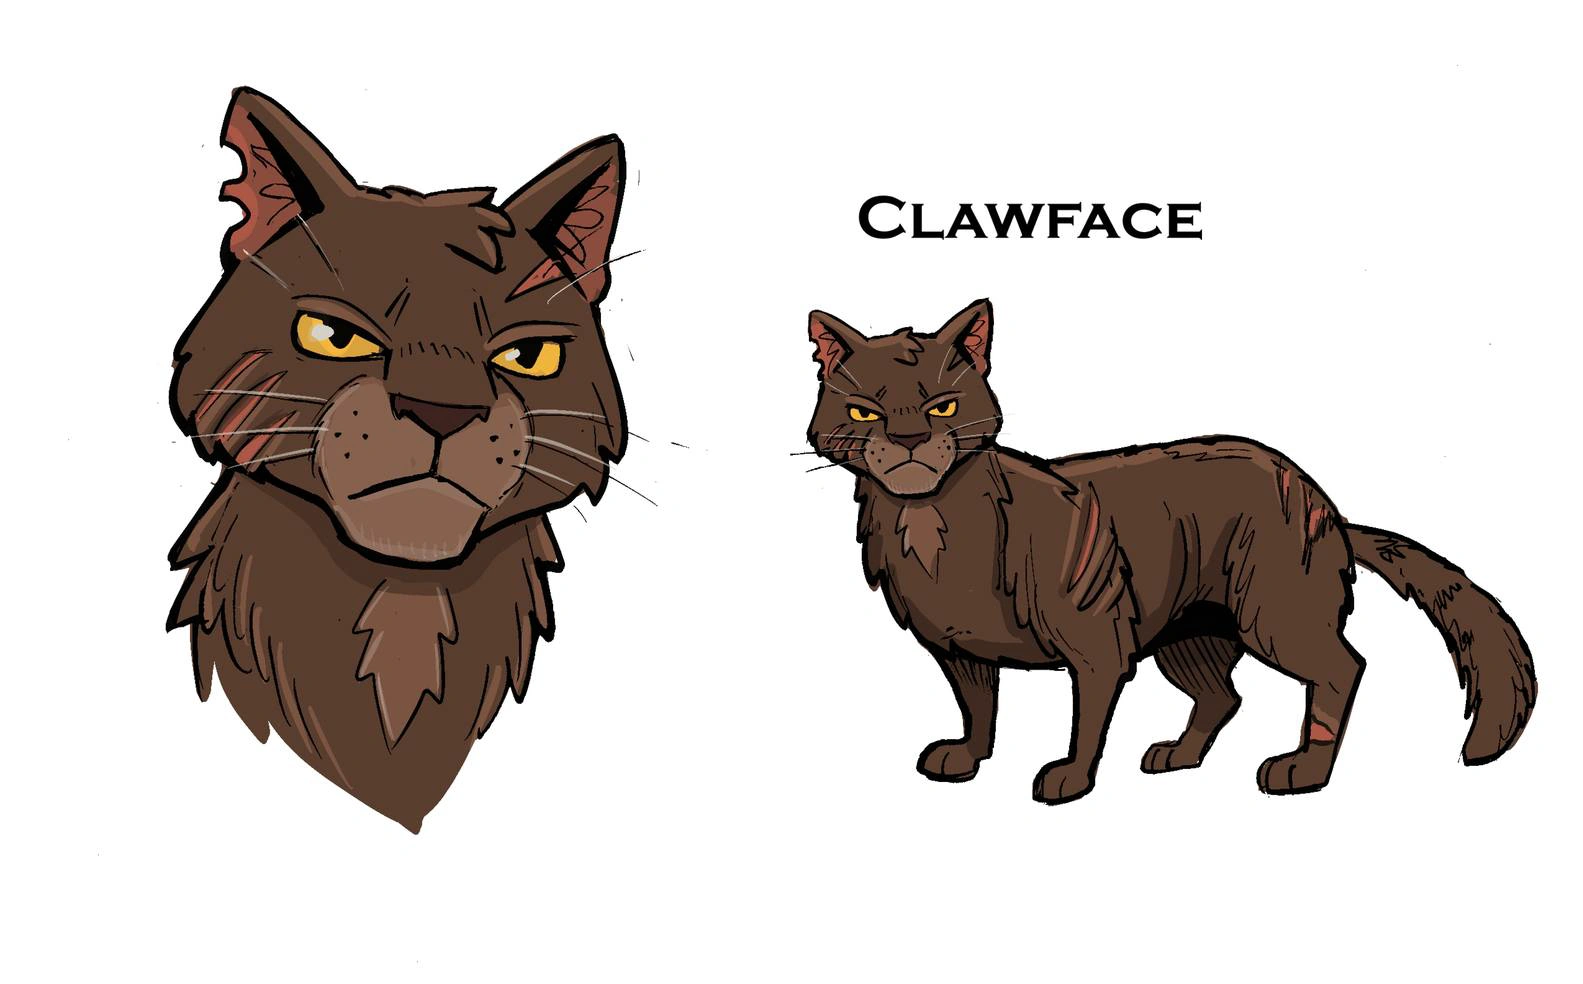 [concept art of Clawface in the graphic novel art style, a headshot and full-body]